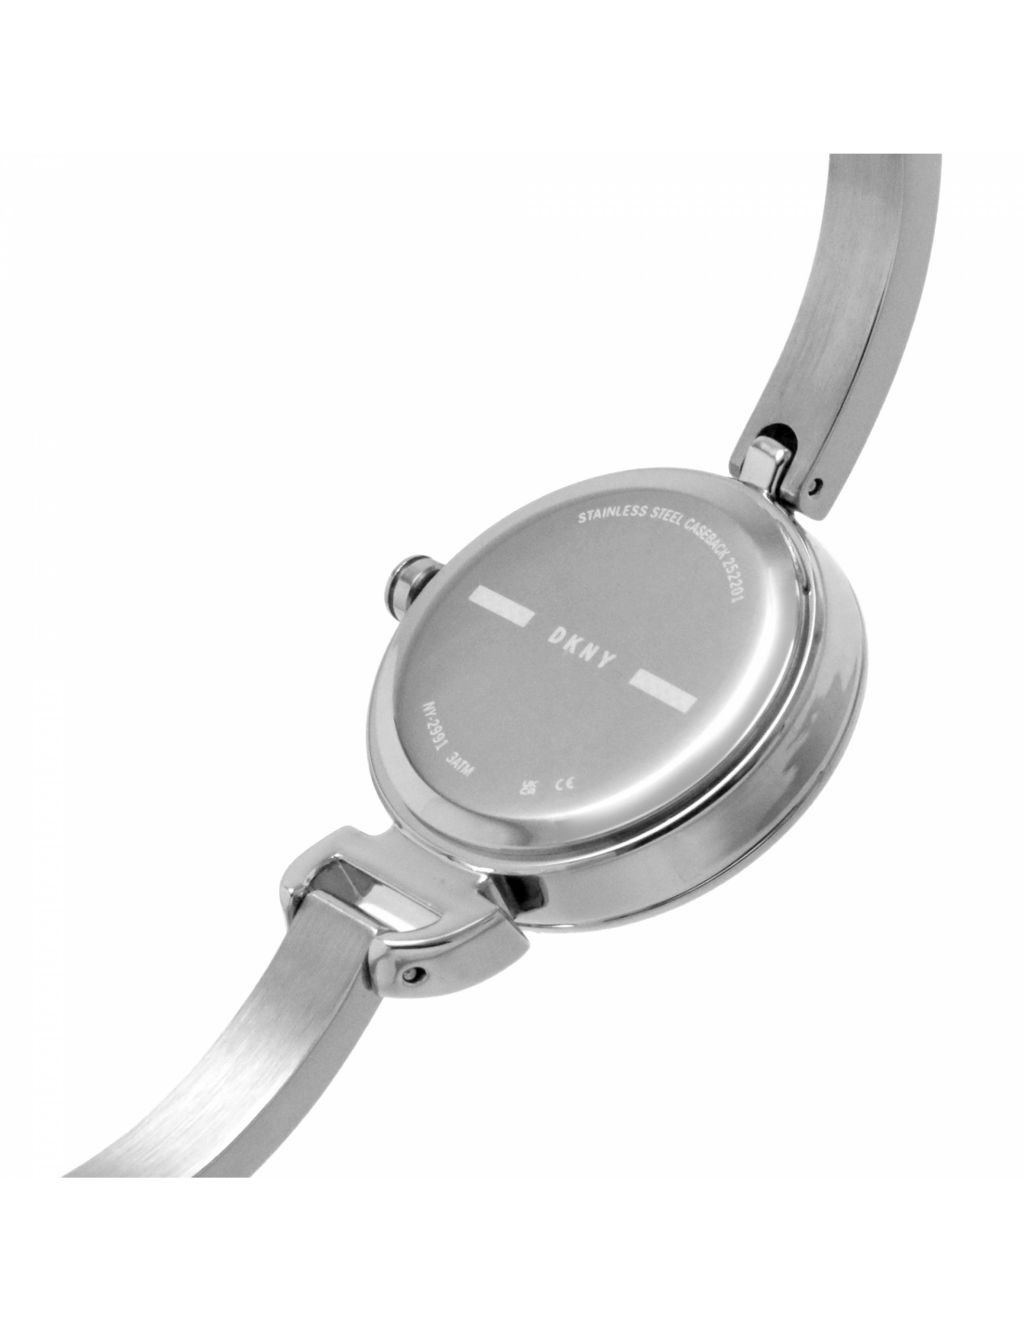 DKNY Uptown Stainless Steel Watch image 8